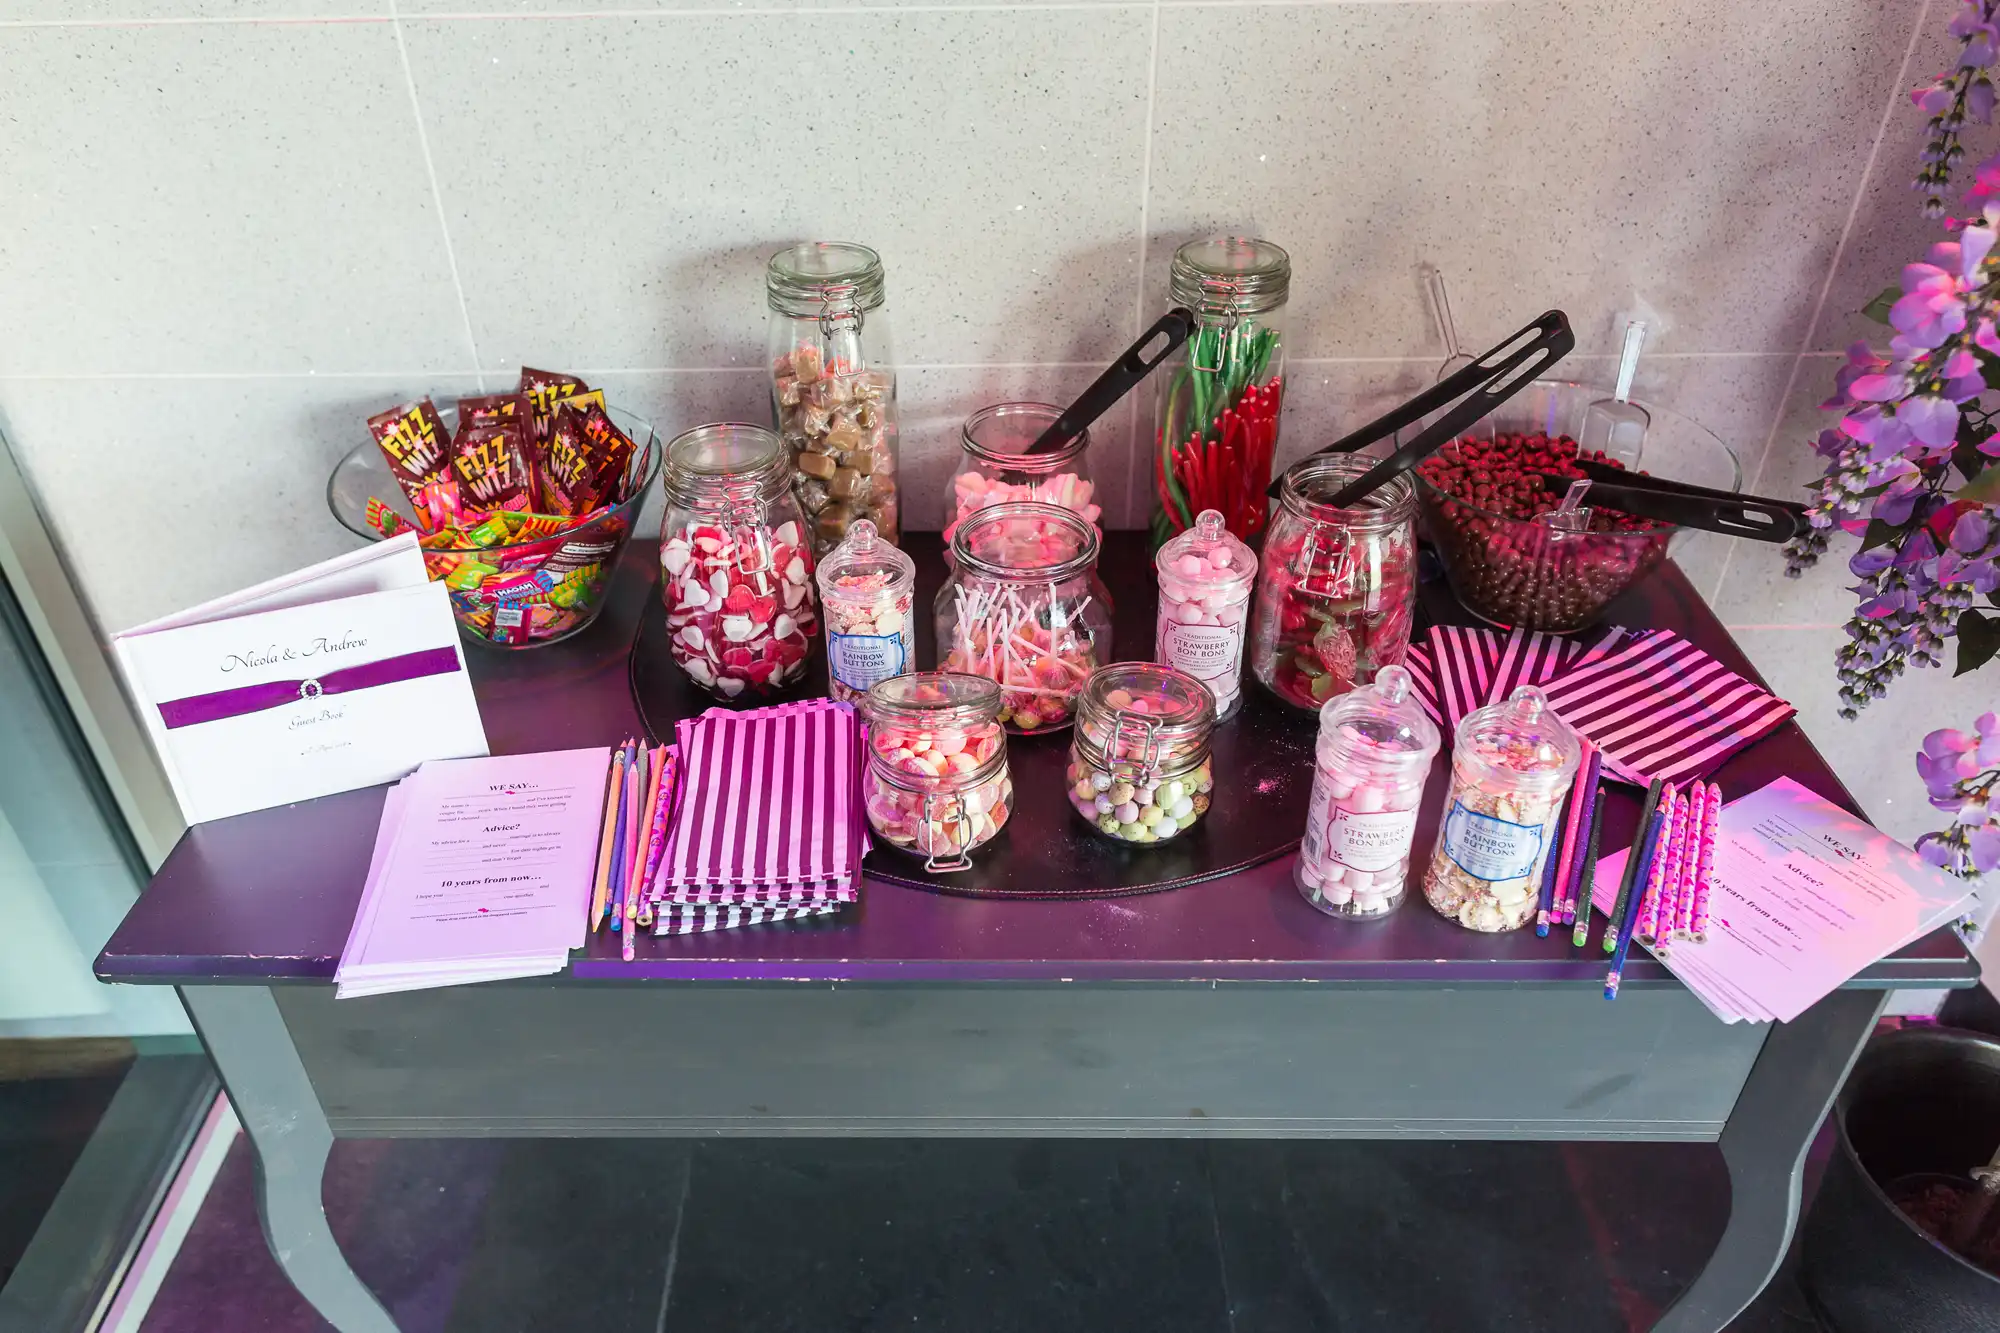 Candy station with various sweets in glass jars and striped paper bags, accompanied by serving utensils and instruction cards, on a dark table.